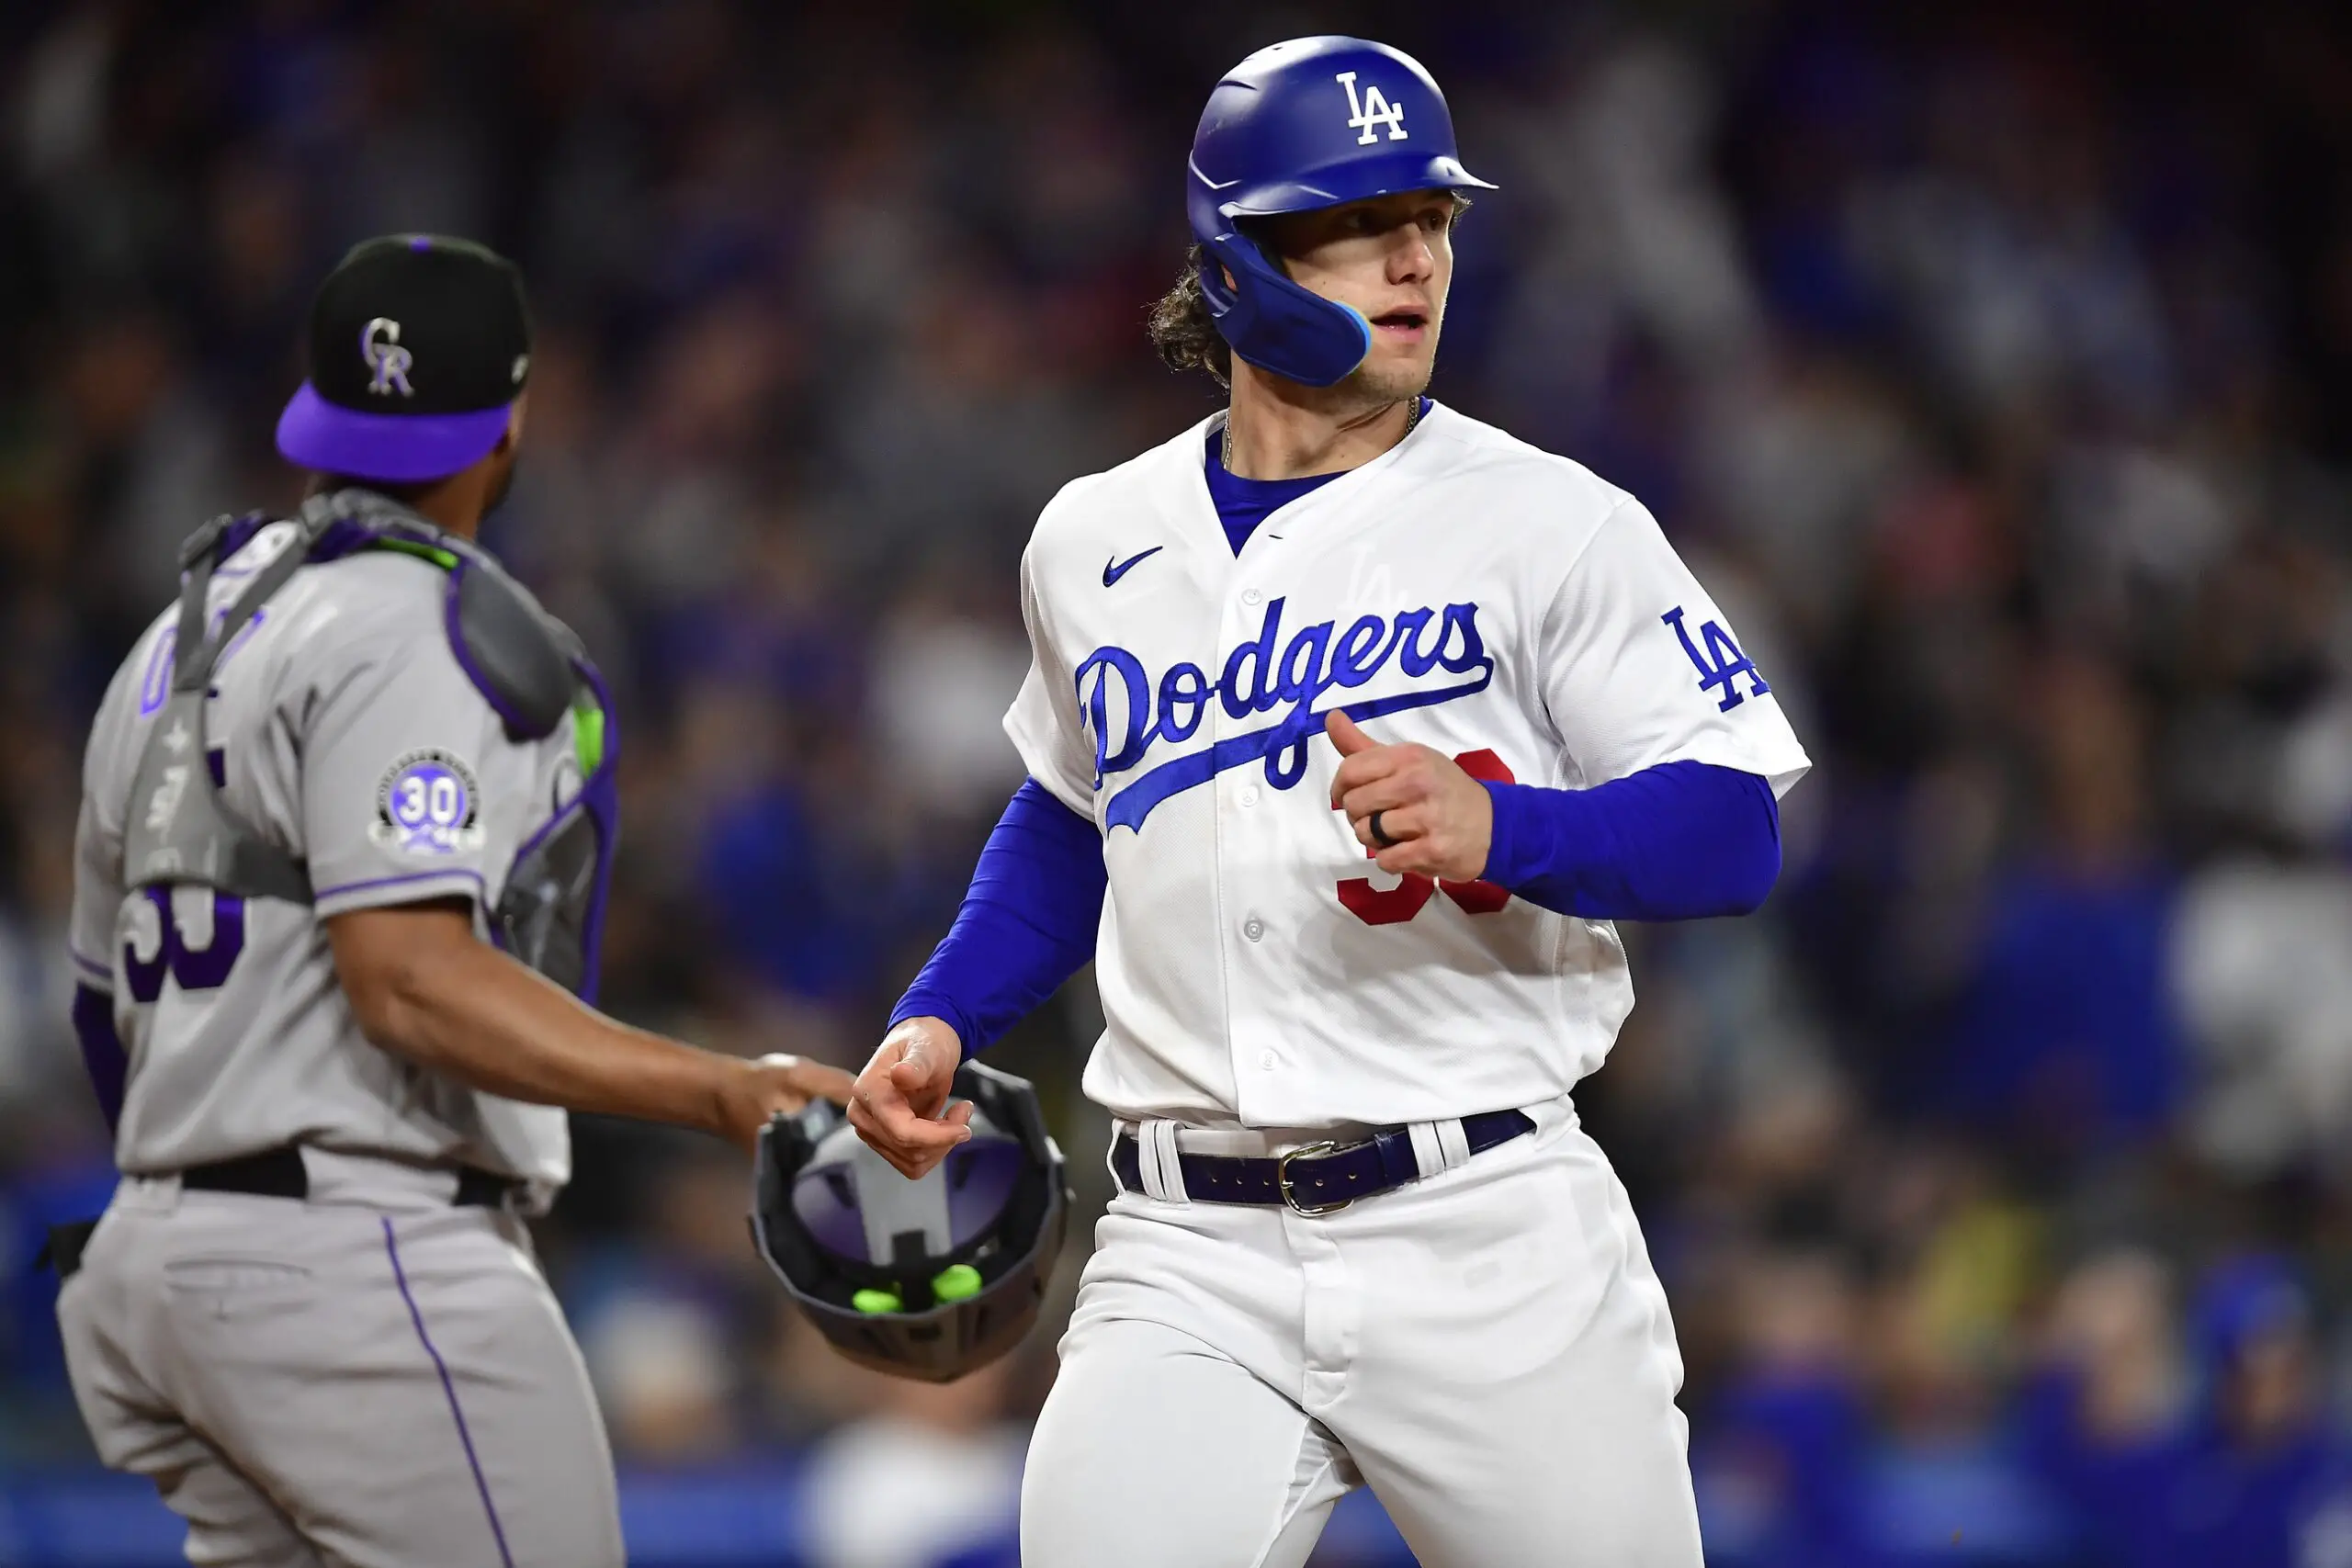 Dodgers Score: Outman Triples Twice, Offense Finally Breaks Out, Vargas Injured